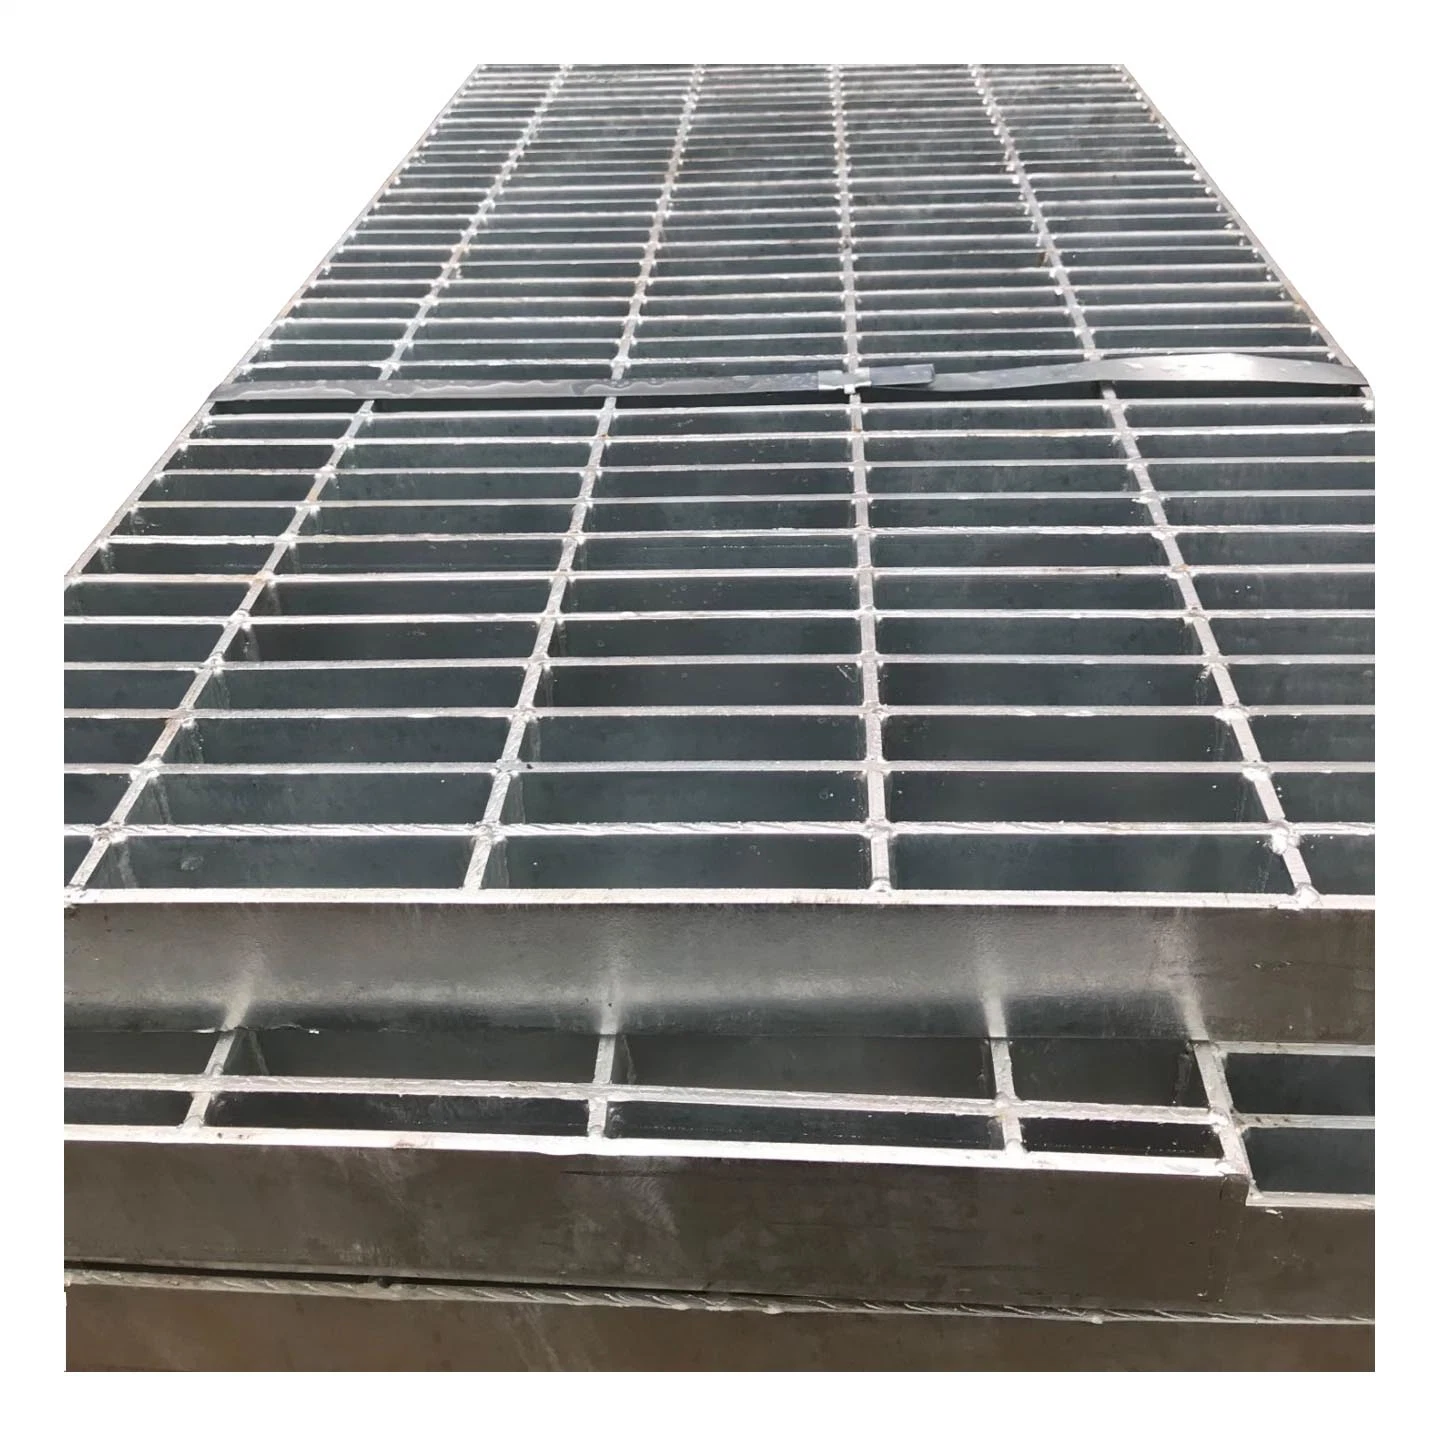 Hot-Dipped Galvanized Heavy Duty Steel Grating for Trench, Drainage Cover, Manhole Cover, Stair Tread, Floor Drain